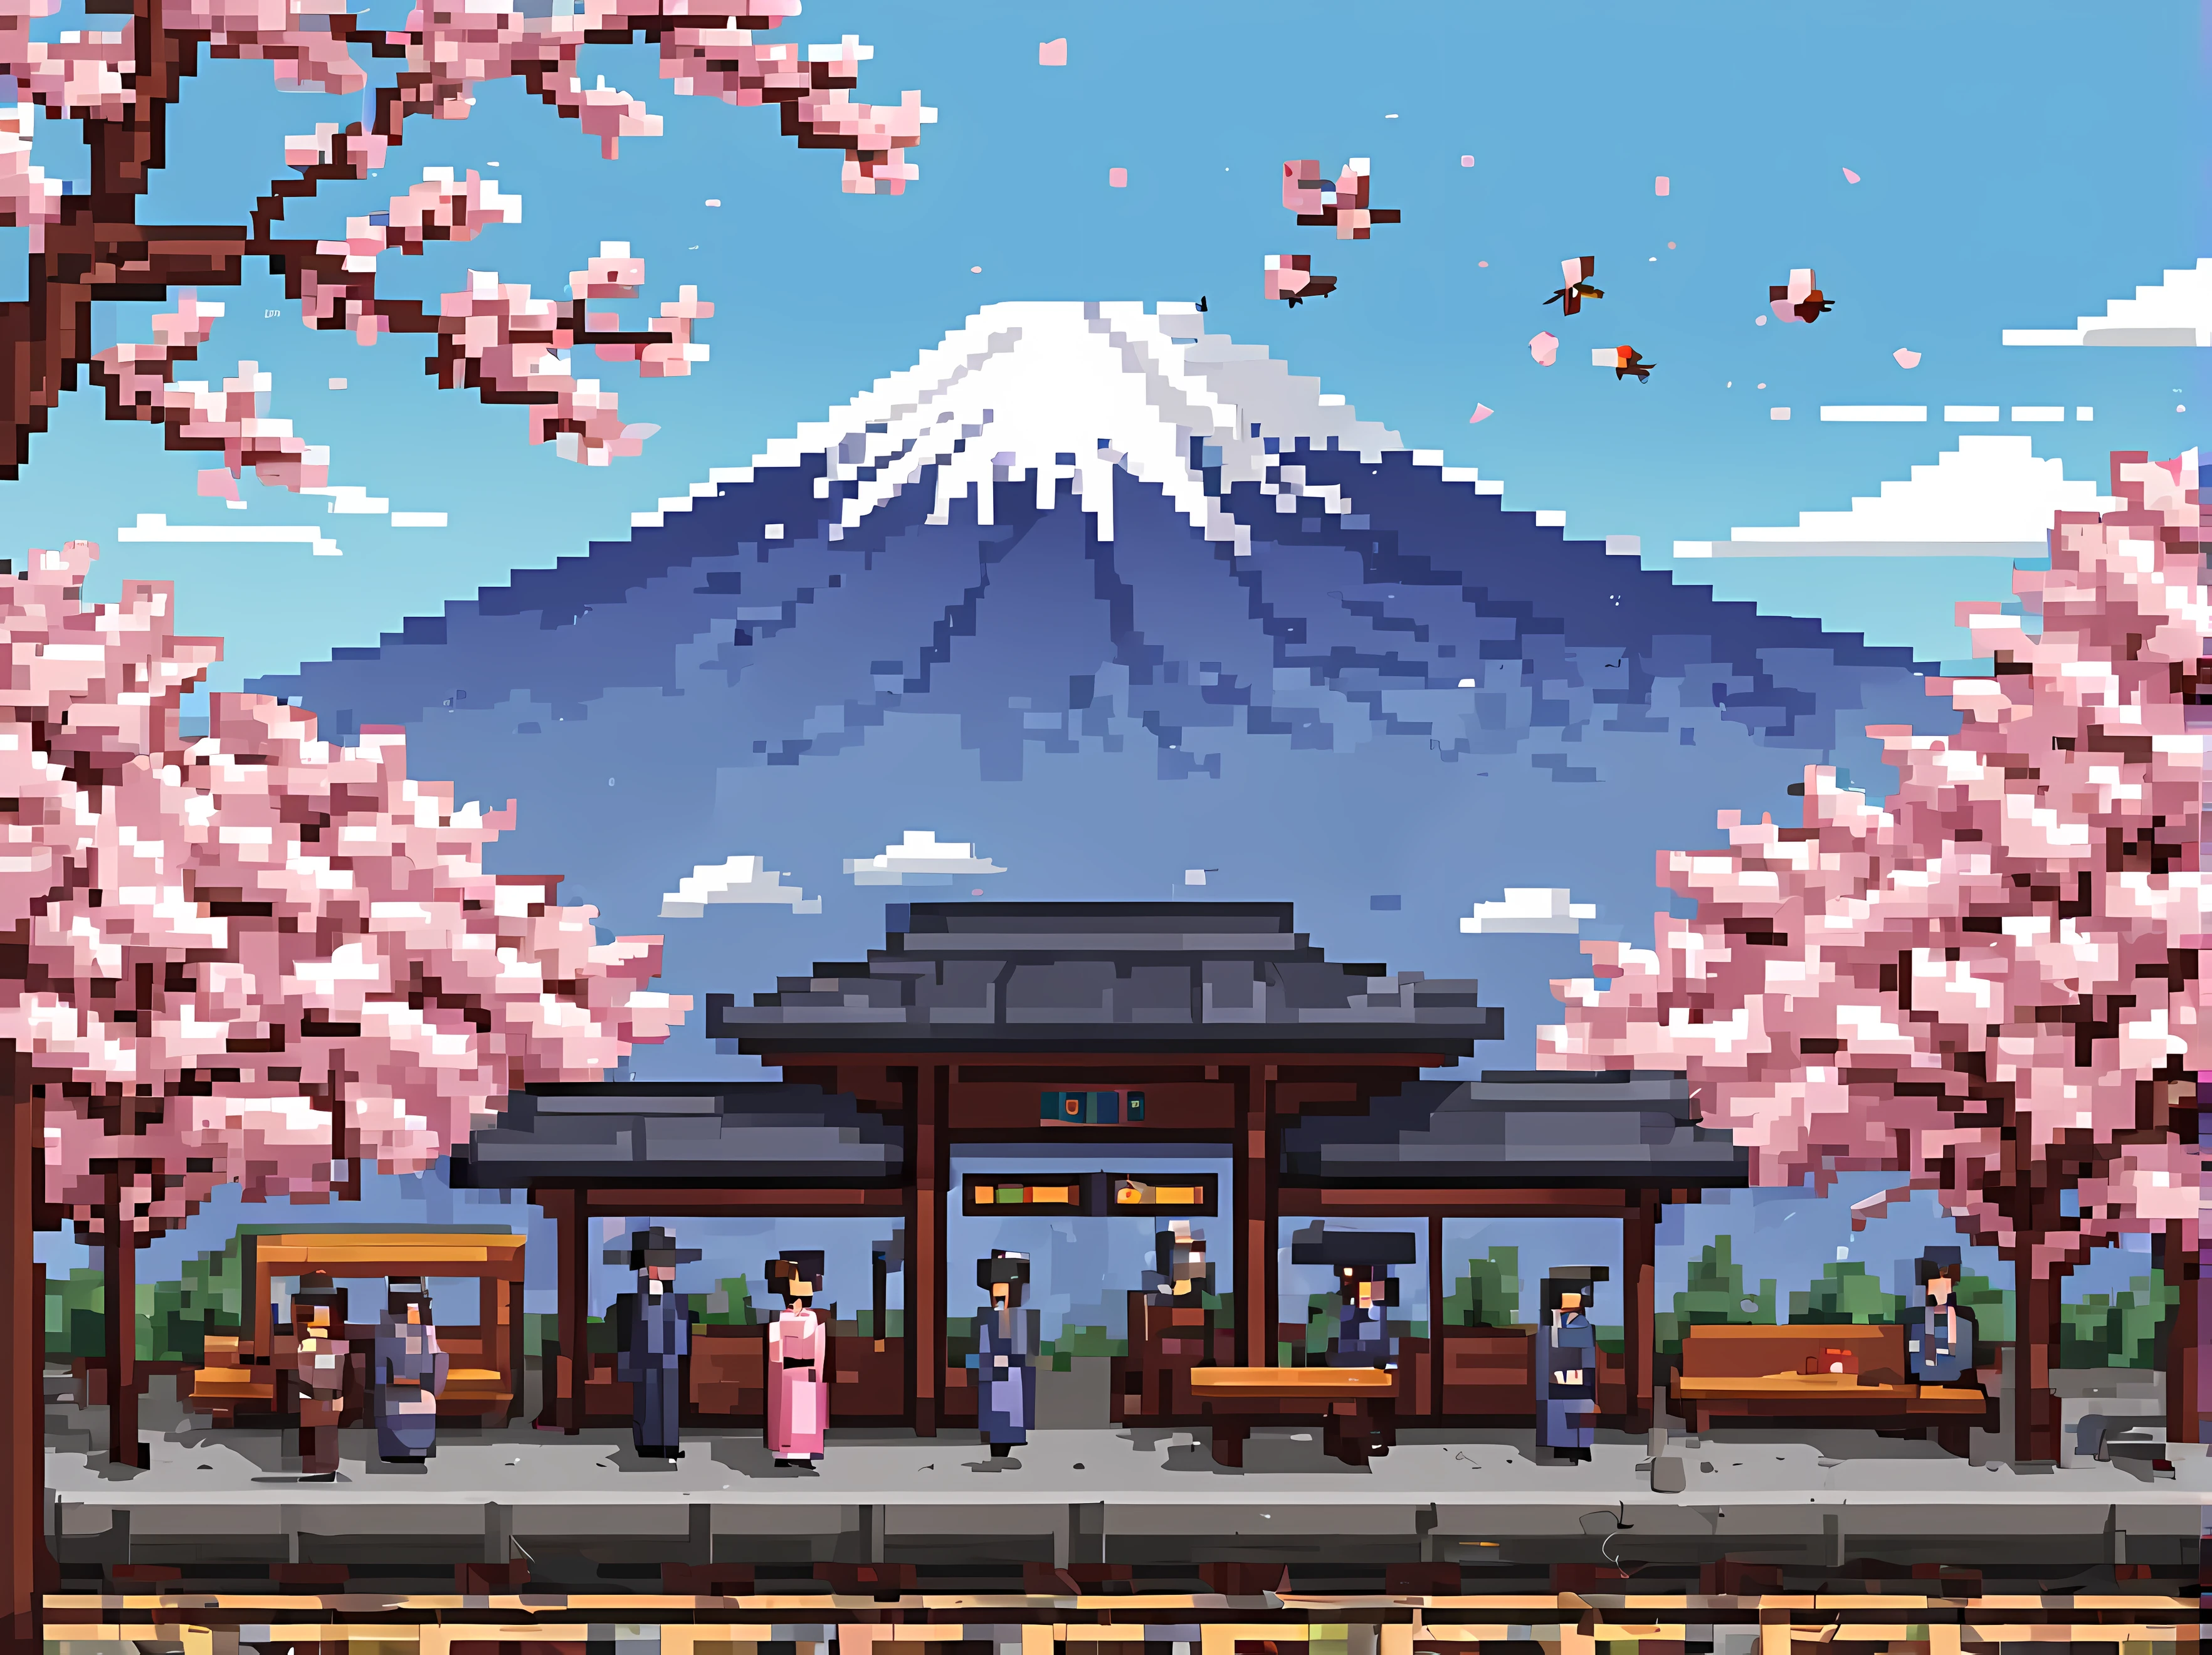 Pixel art, a captivating scene of a Japanese train station on a sunny spring day, a sleek futuristic train at the platform, surrounded by blooming Sakura trees, traditional elements like lanterns and wooden benches, Mount Fuji in the background, passengers in traditional attire, tiny birds in flight, masterpiece in maximum 16K resolution, superb quality. | ((More_Detail))